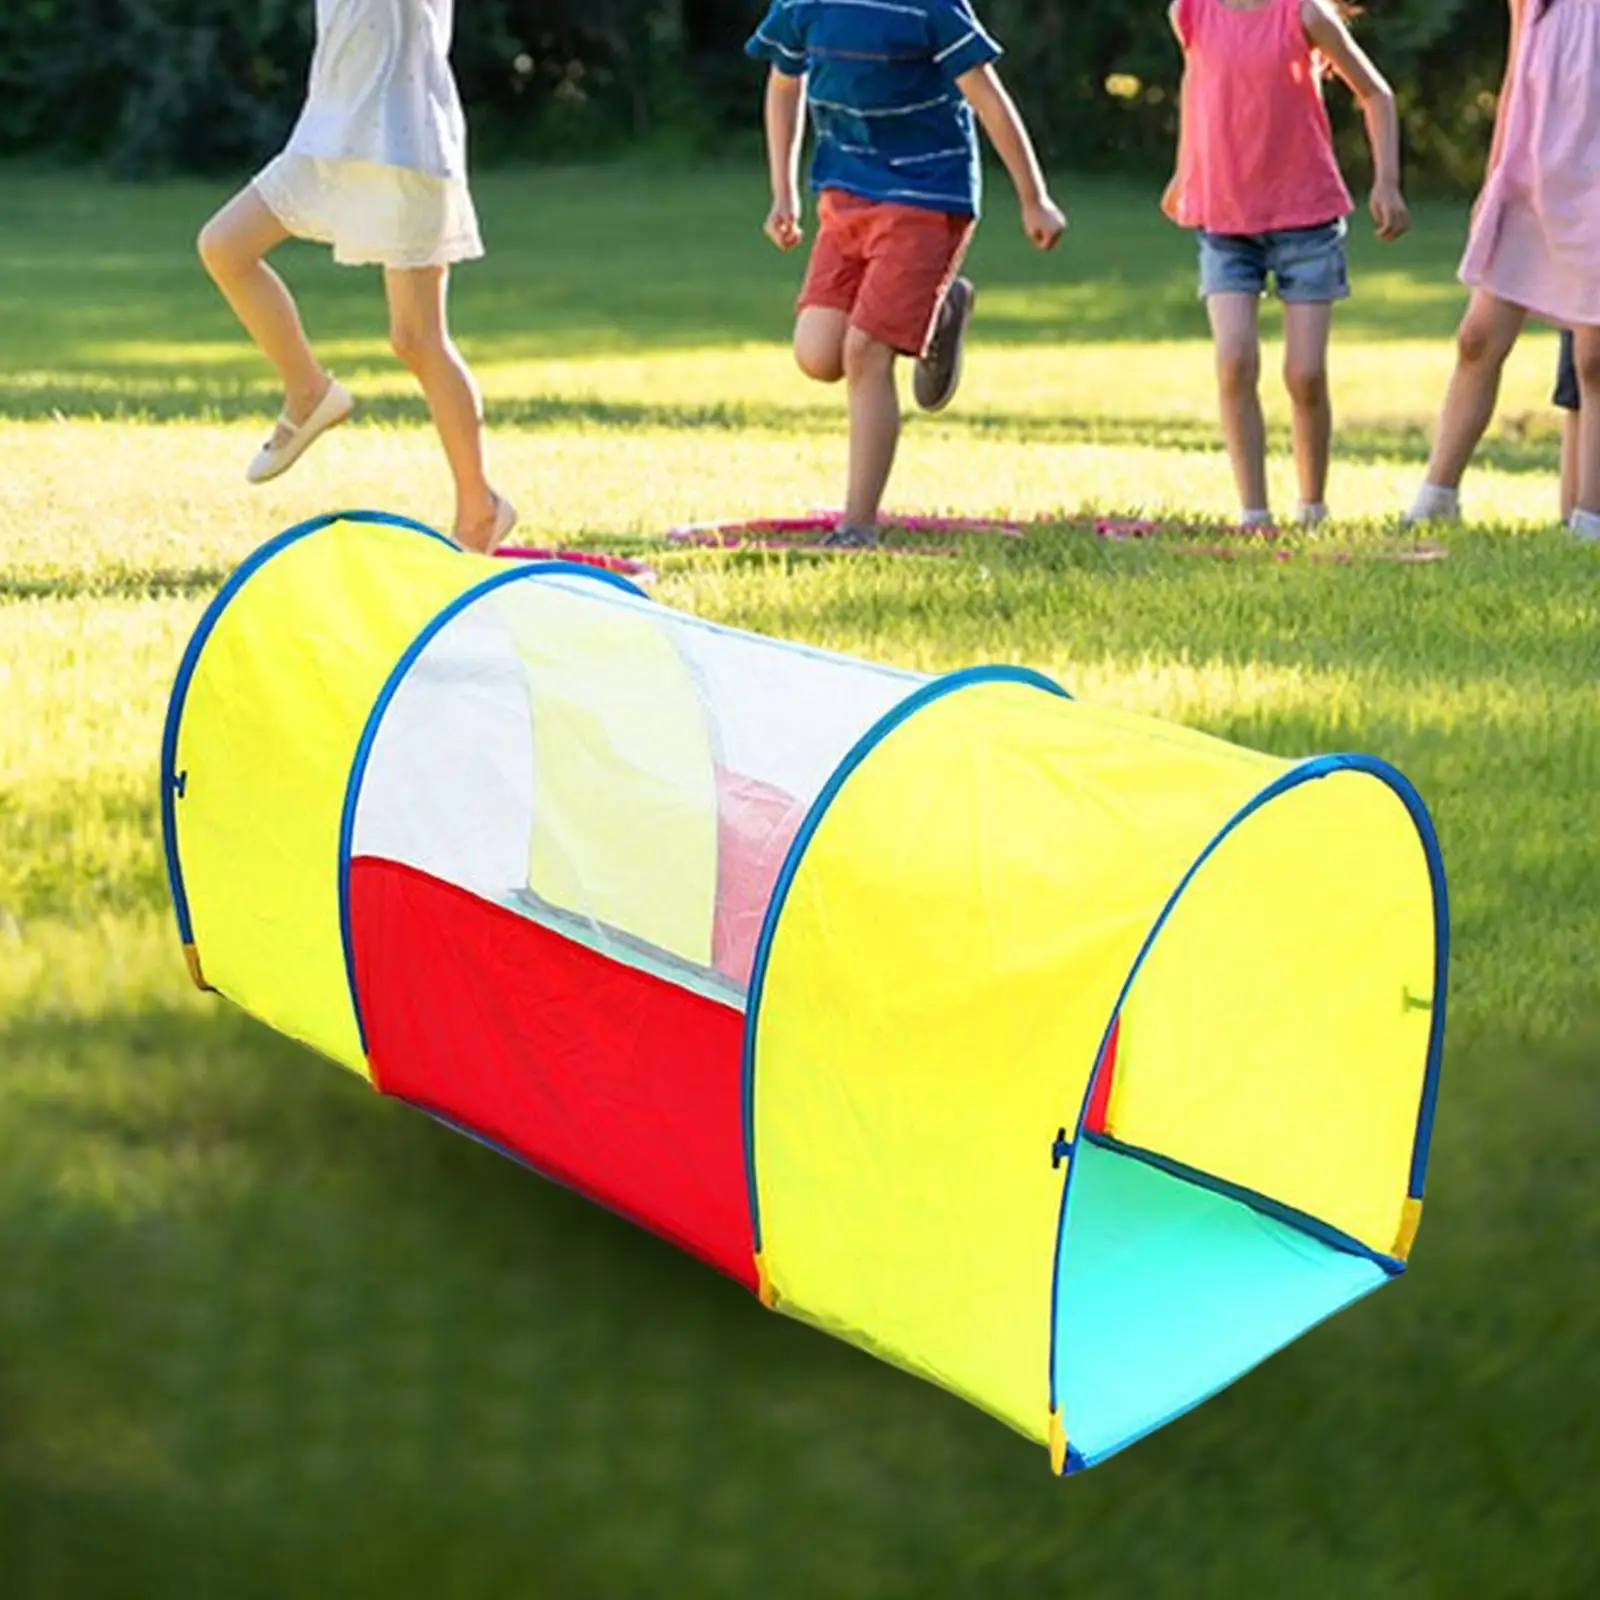 Breathable Play Tent Toy Indoor Outdoor Toy Colorful Crawl Tunnel Toy Backyard Playset for Children Girls Infants Toddlers Boys